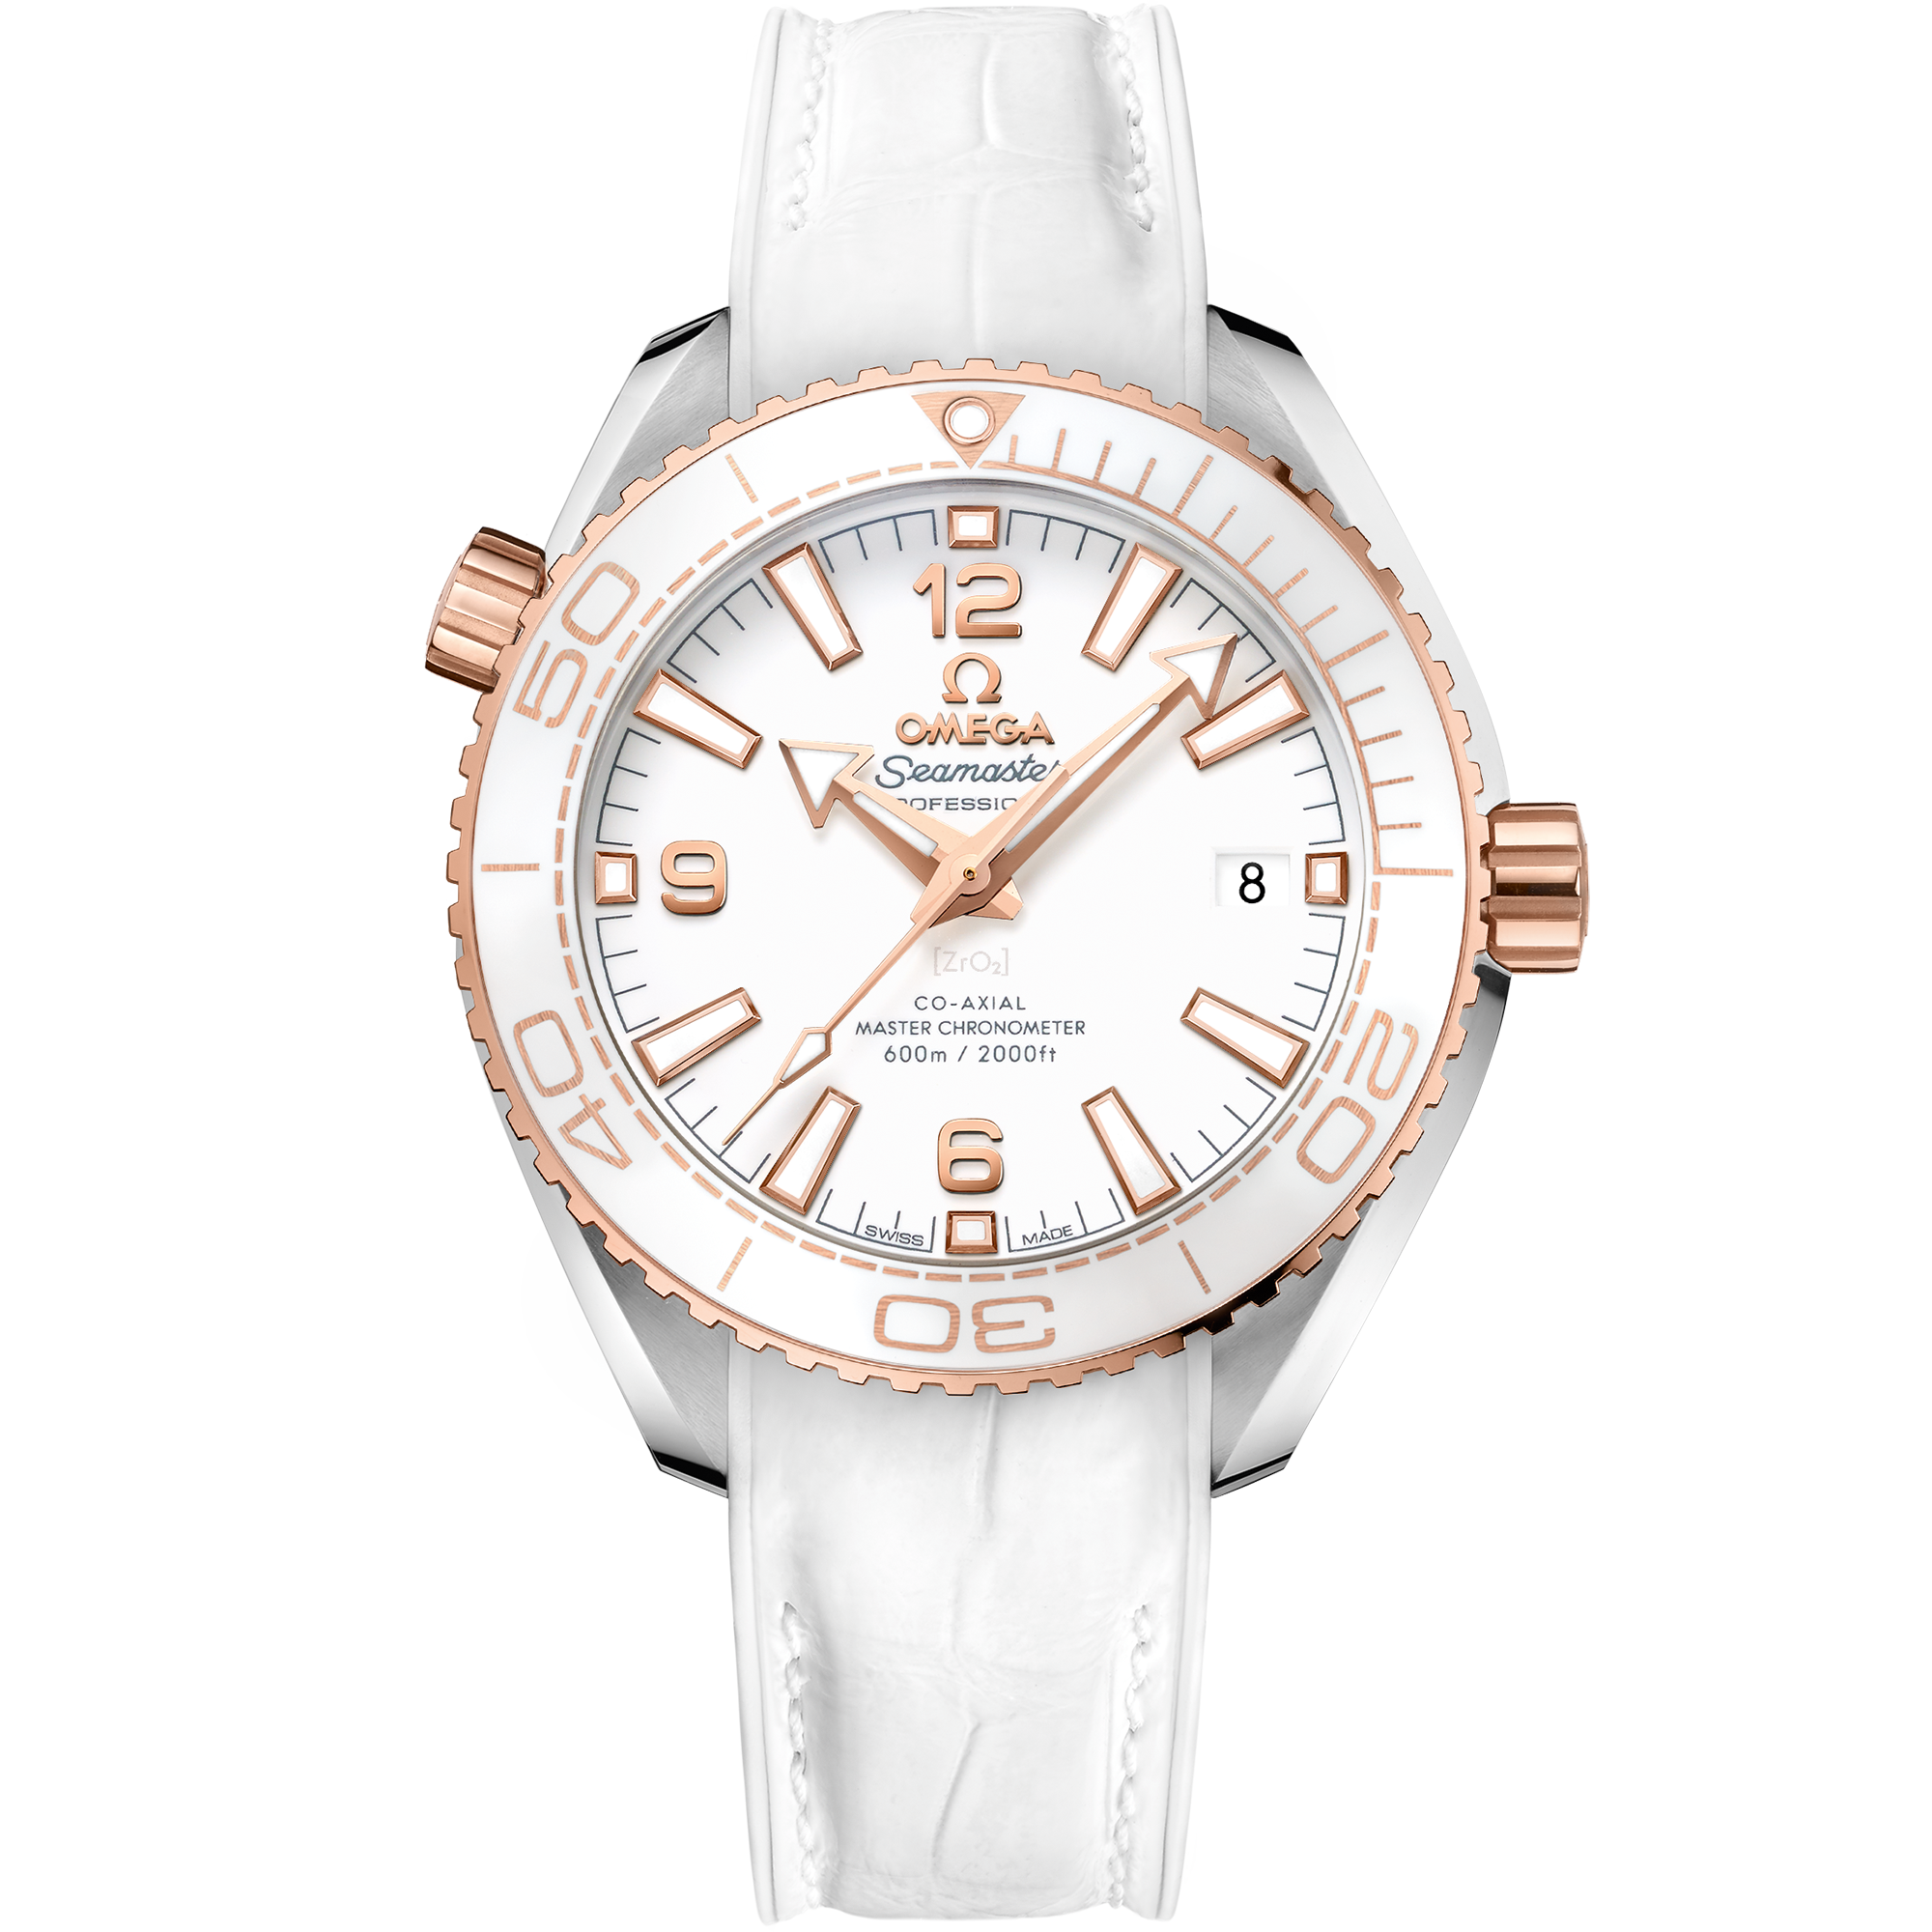 Seamaster 39.5 mm, steel - Sedna™ gold on leather strap with rubber lining - 215.23.40.20.04.001